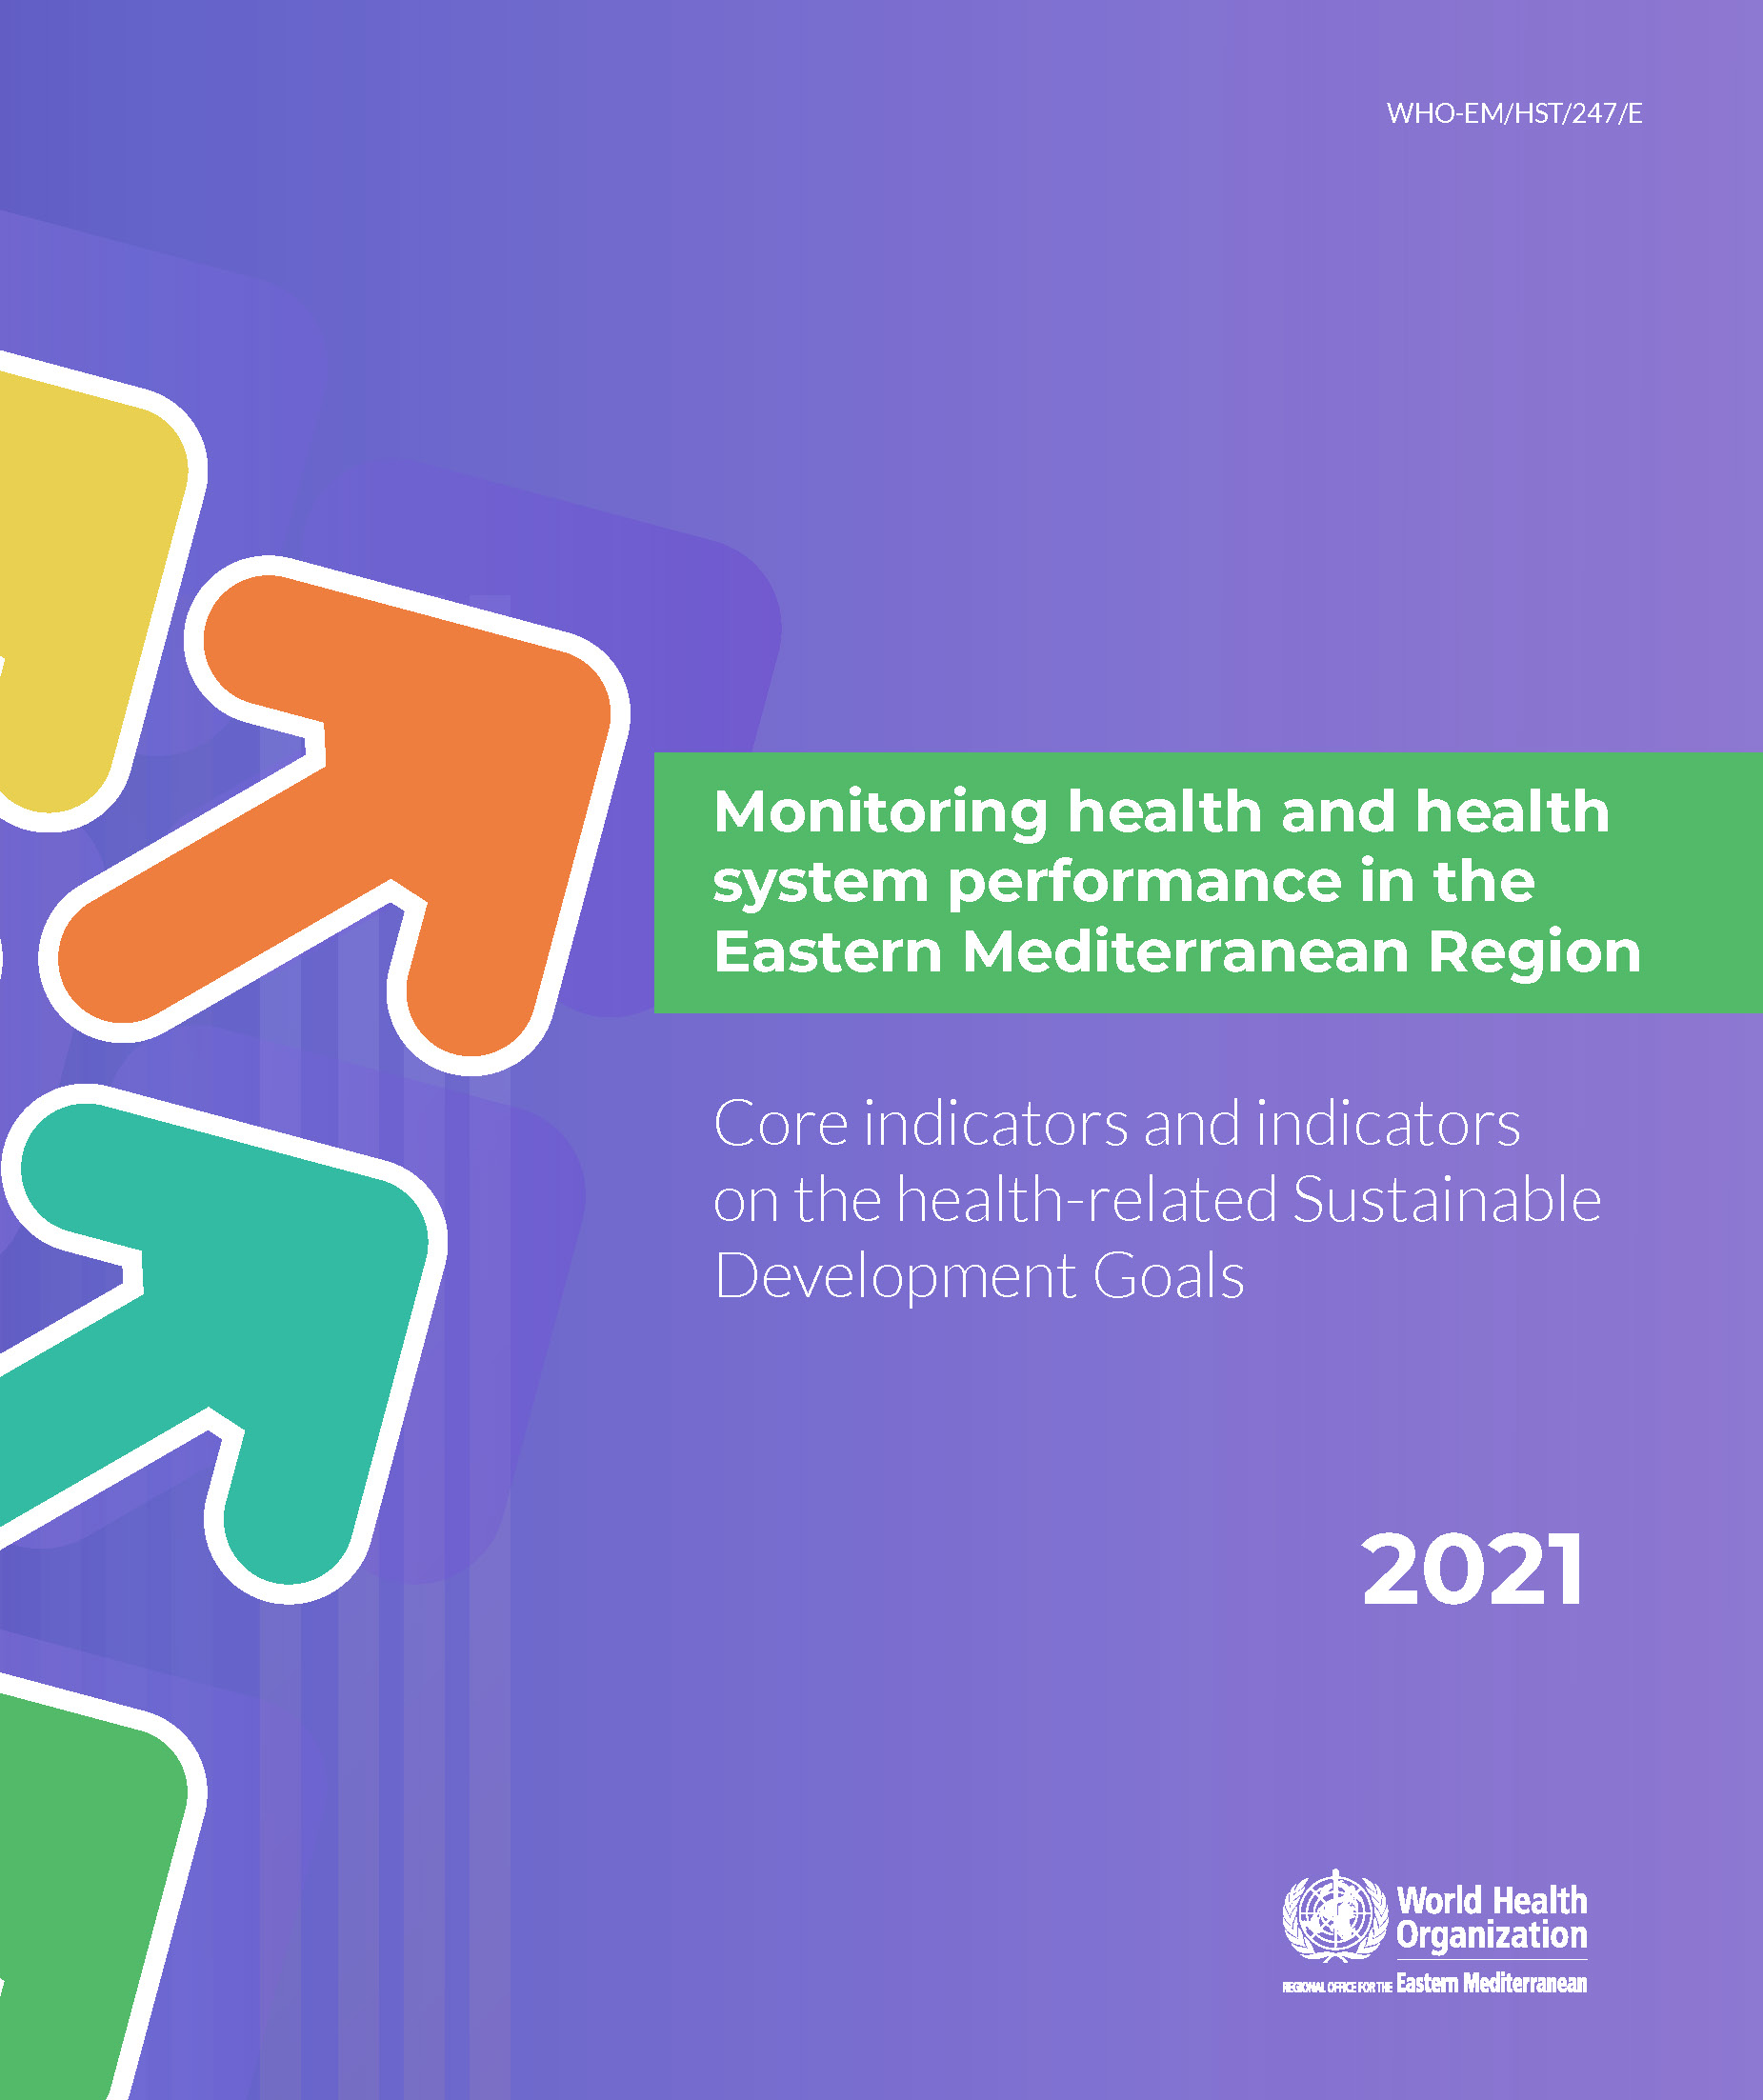 Monitoring health and health system performance in the Eastern Mediterranean Region: core indicators and indicators on the health-related Sustainable Development Goals 2021